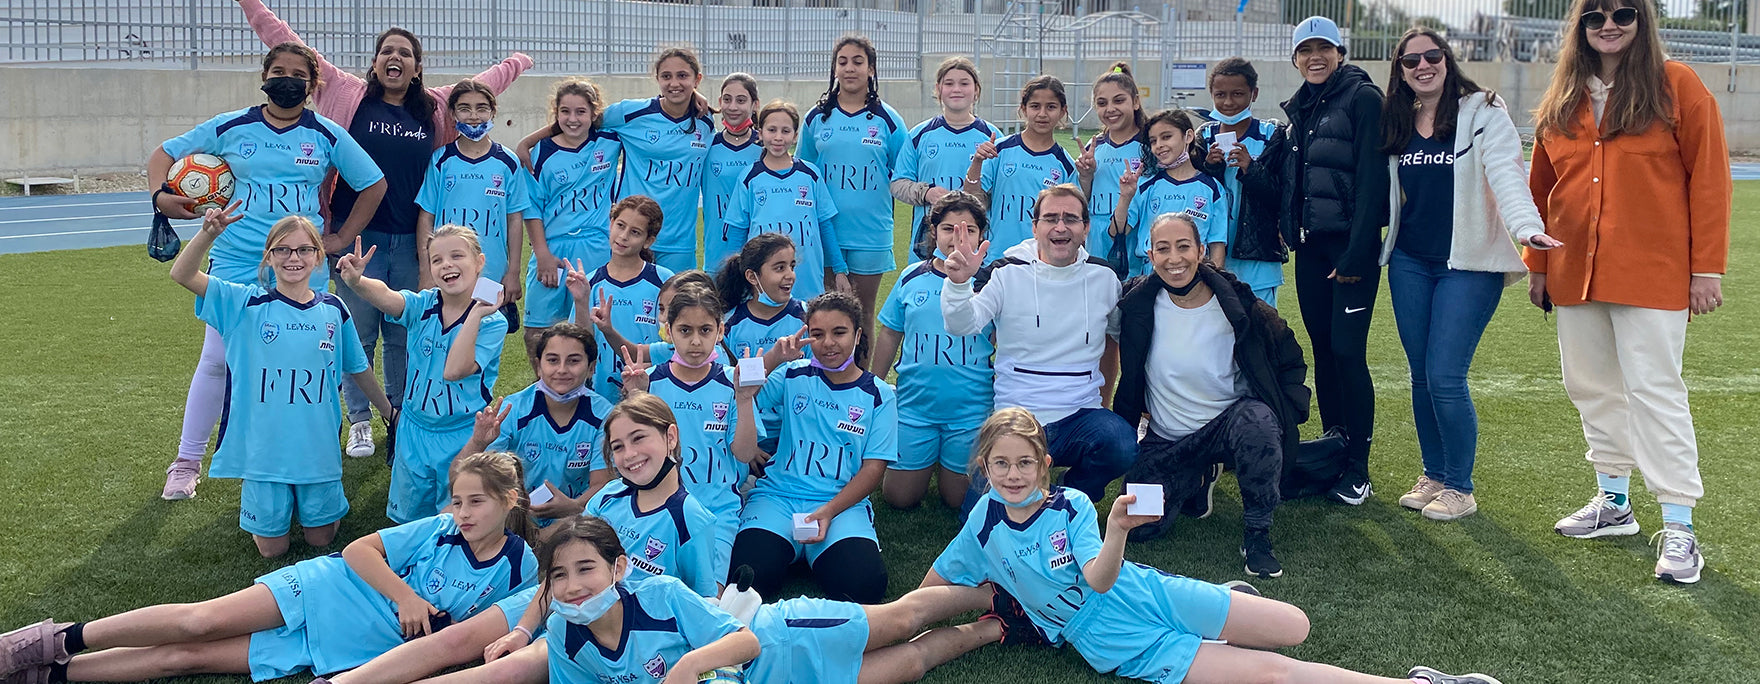 FRÉ and Boatot: Empowering Girls through Soccer